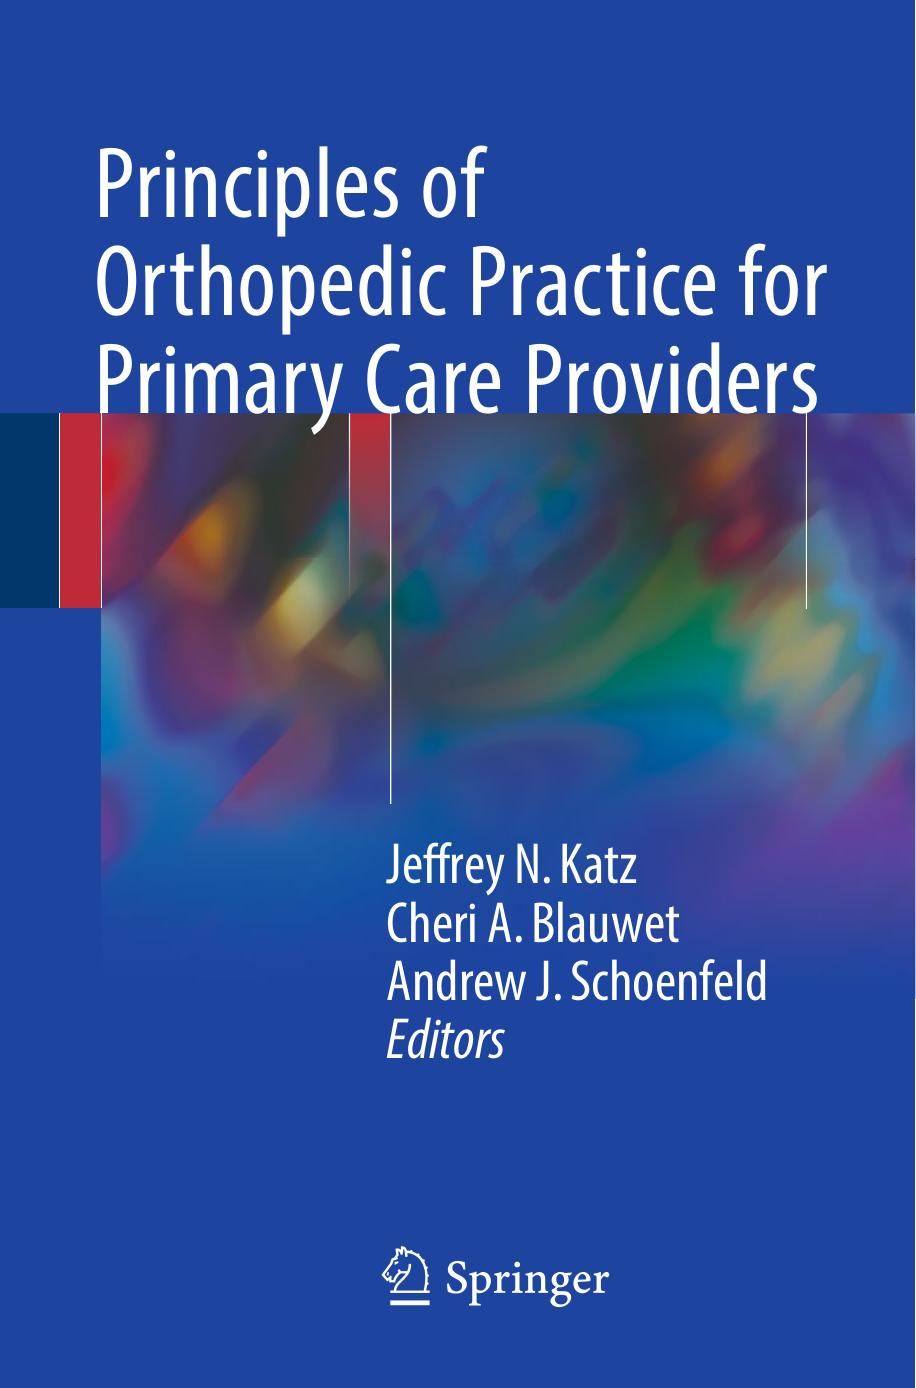 Principles of Orthopedic Practice for Primary Care Providers 2018.pdf